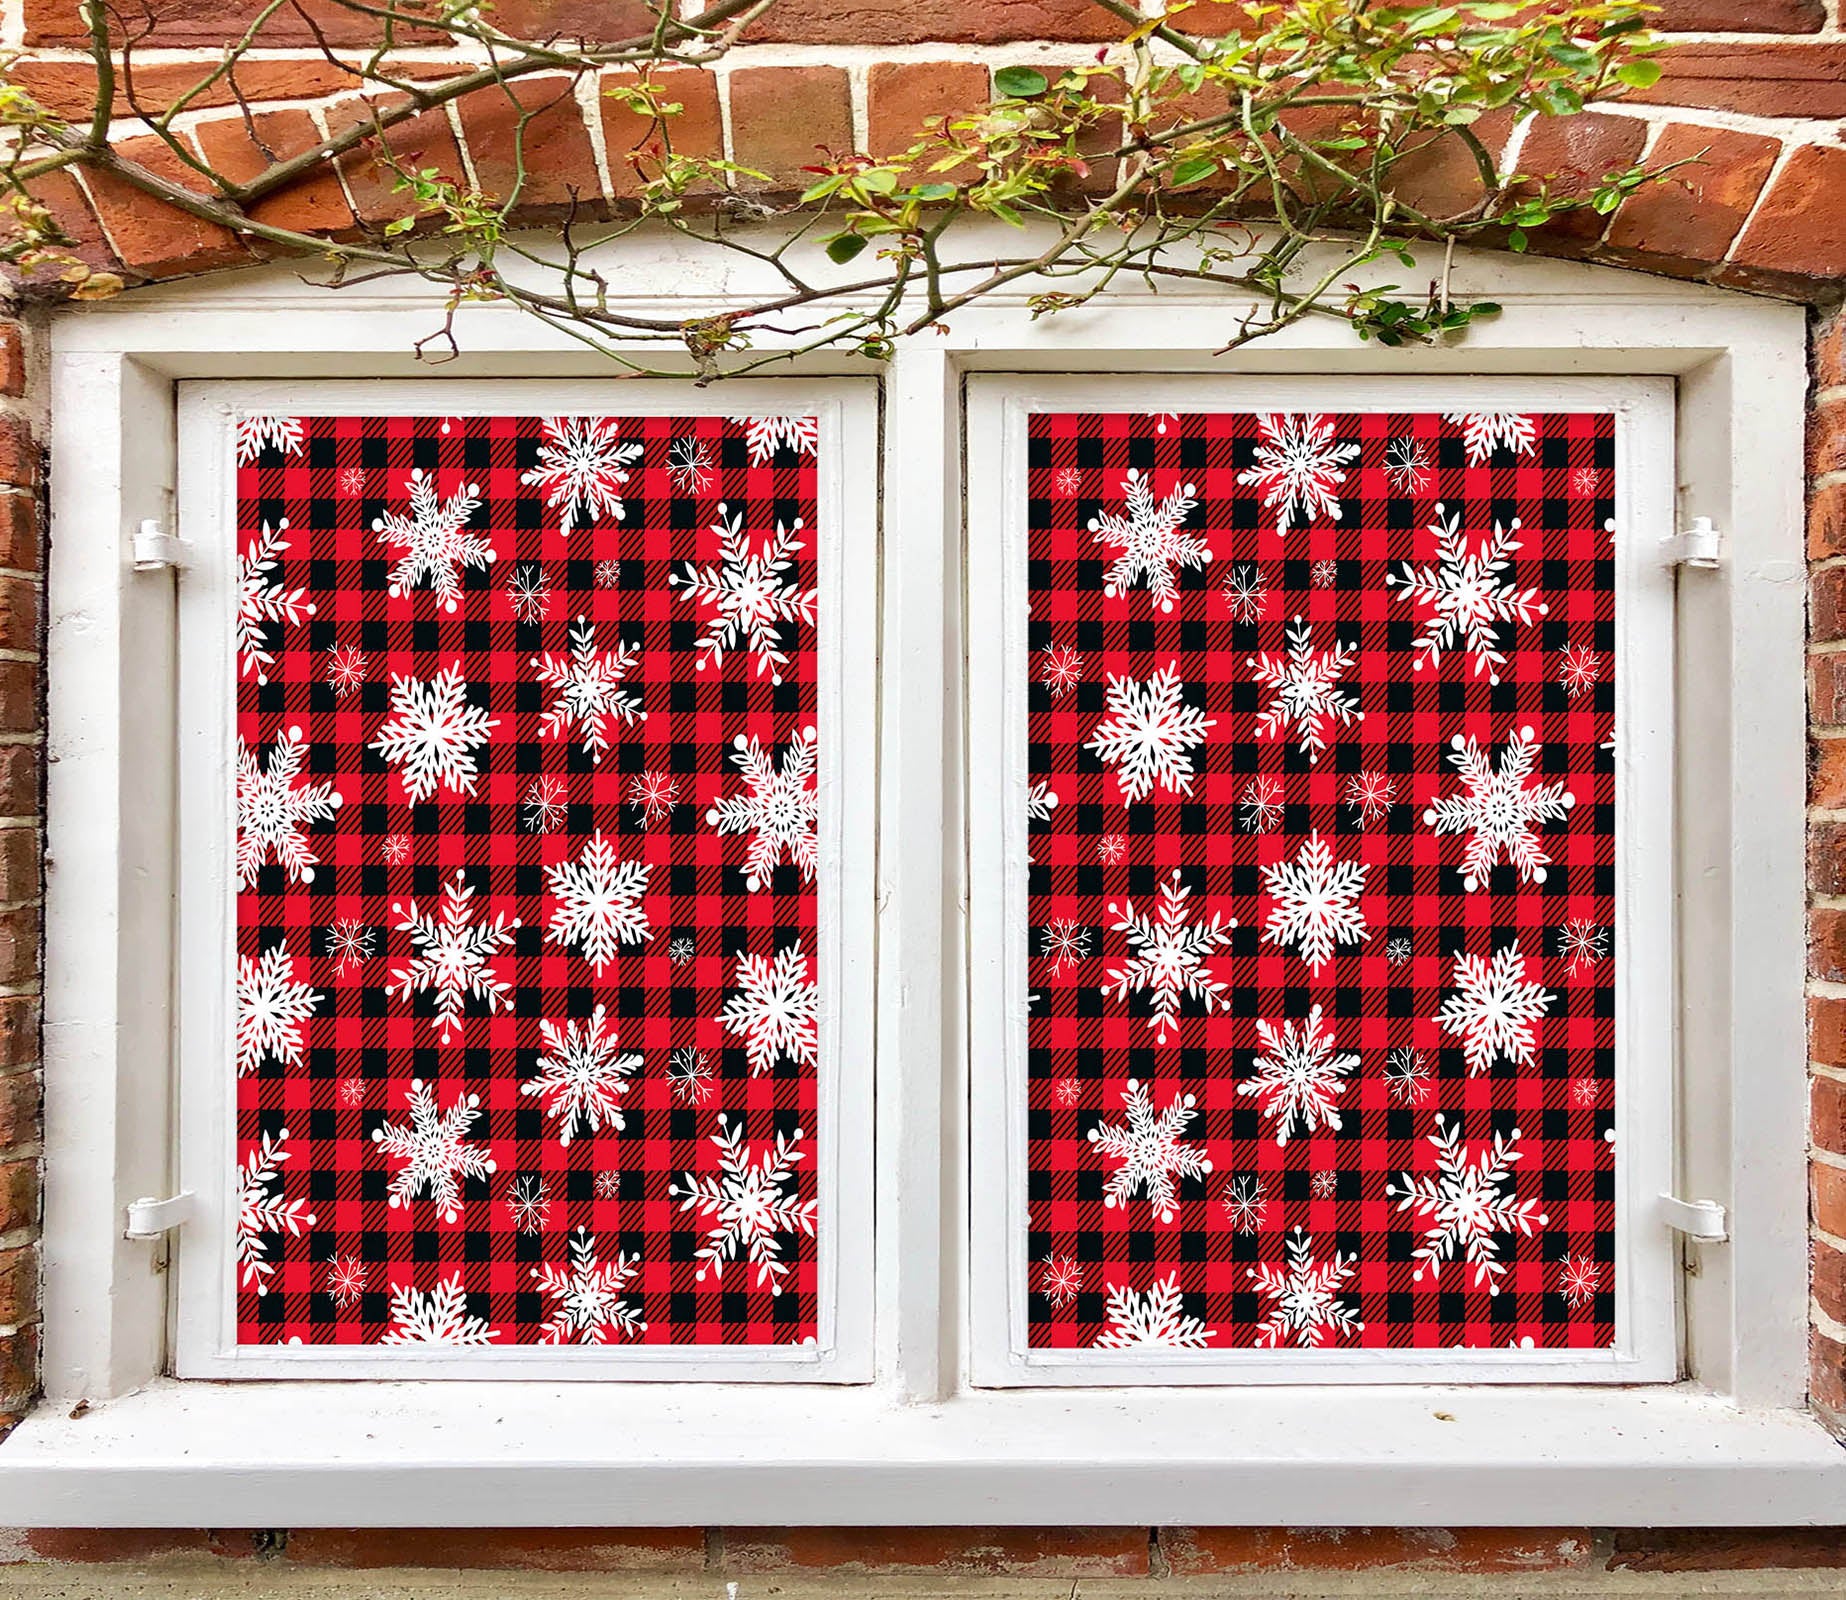 3D Snowflake Pattern 30083 Christmas Window Film Print Sticker Cling Stained Glass Xmas